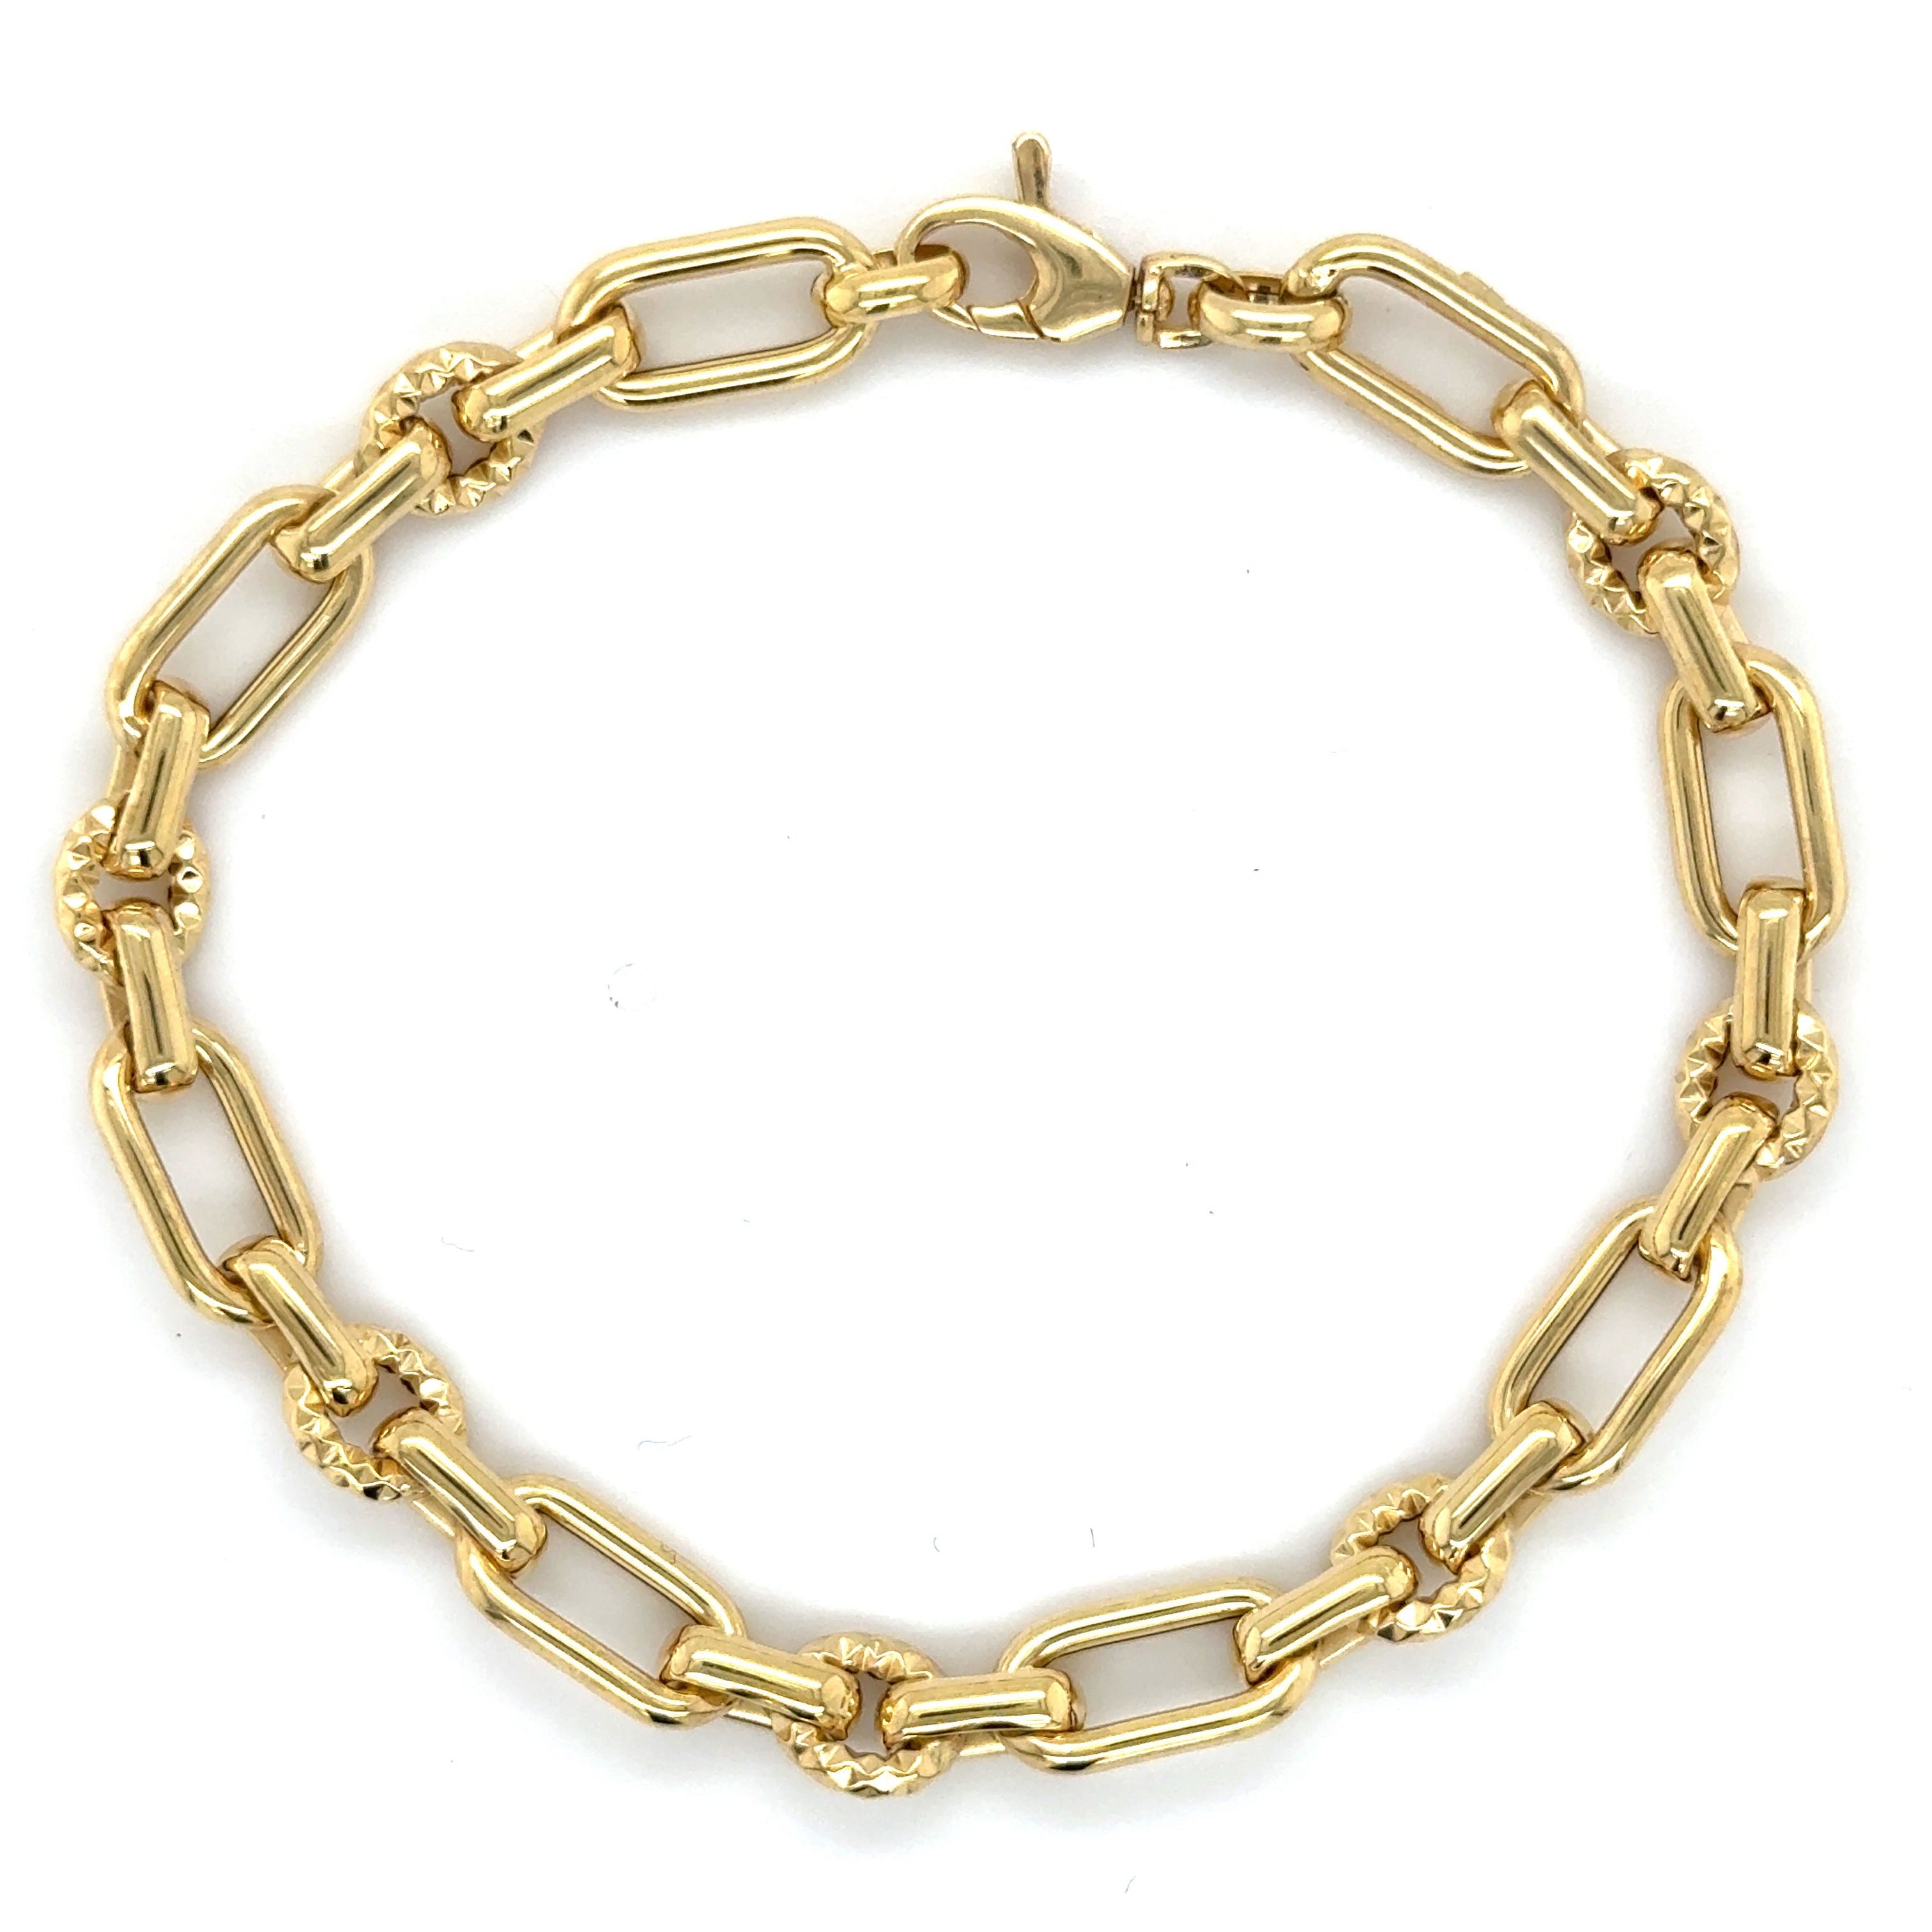 14K YELLOW GOLD OVAL AND ROUND LINK BRACELET WOMEN